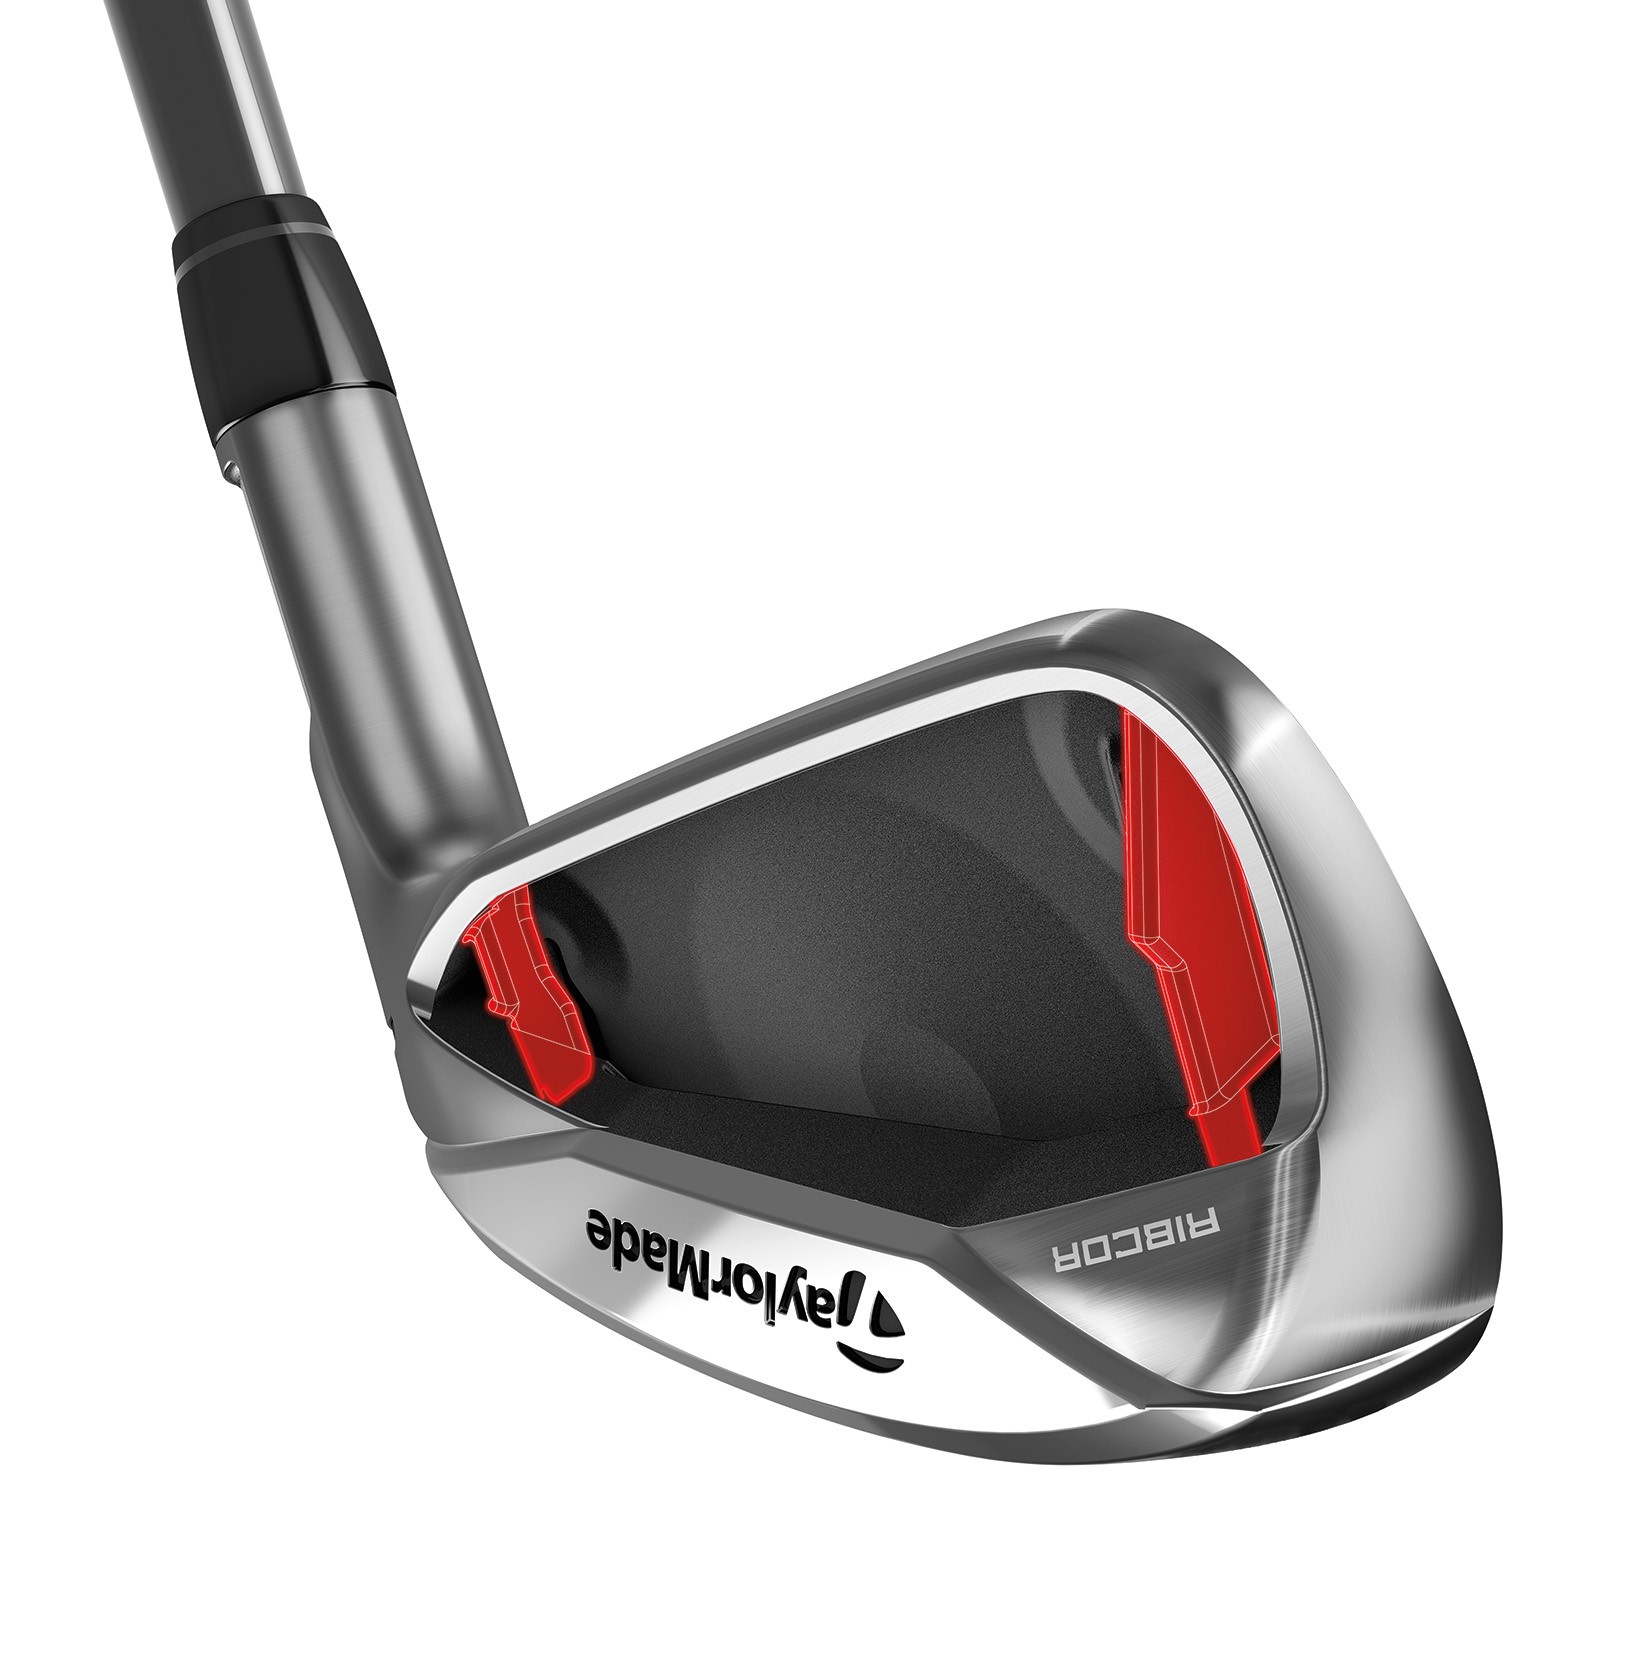 TaylorMade launch new M3 and M4 irons